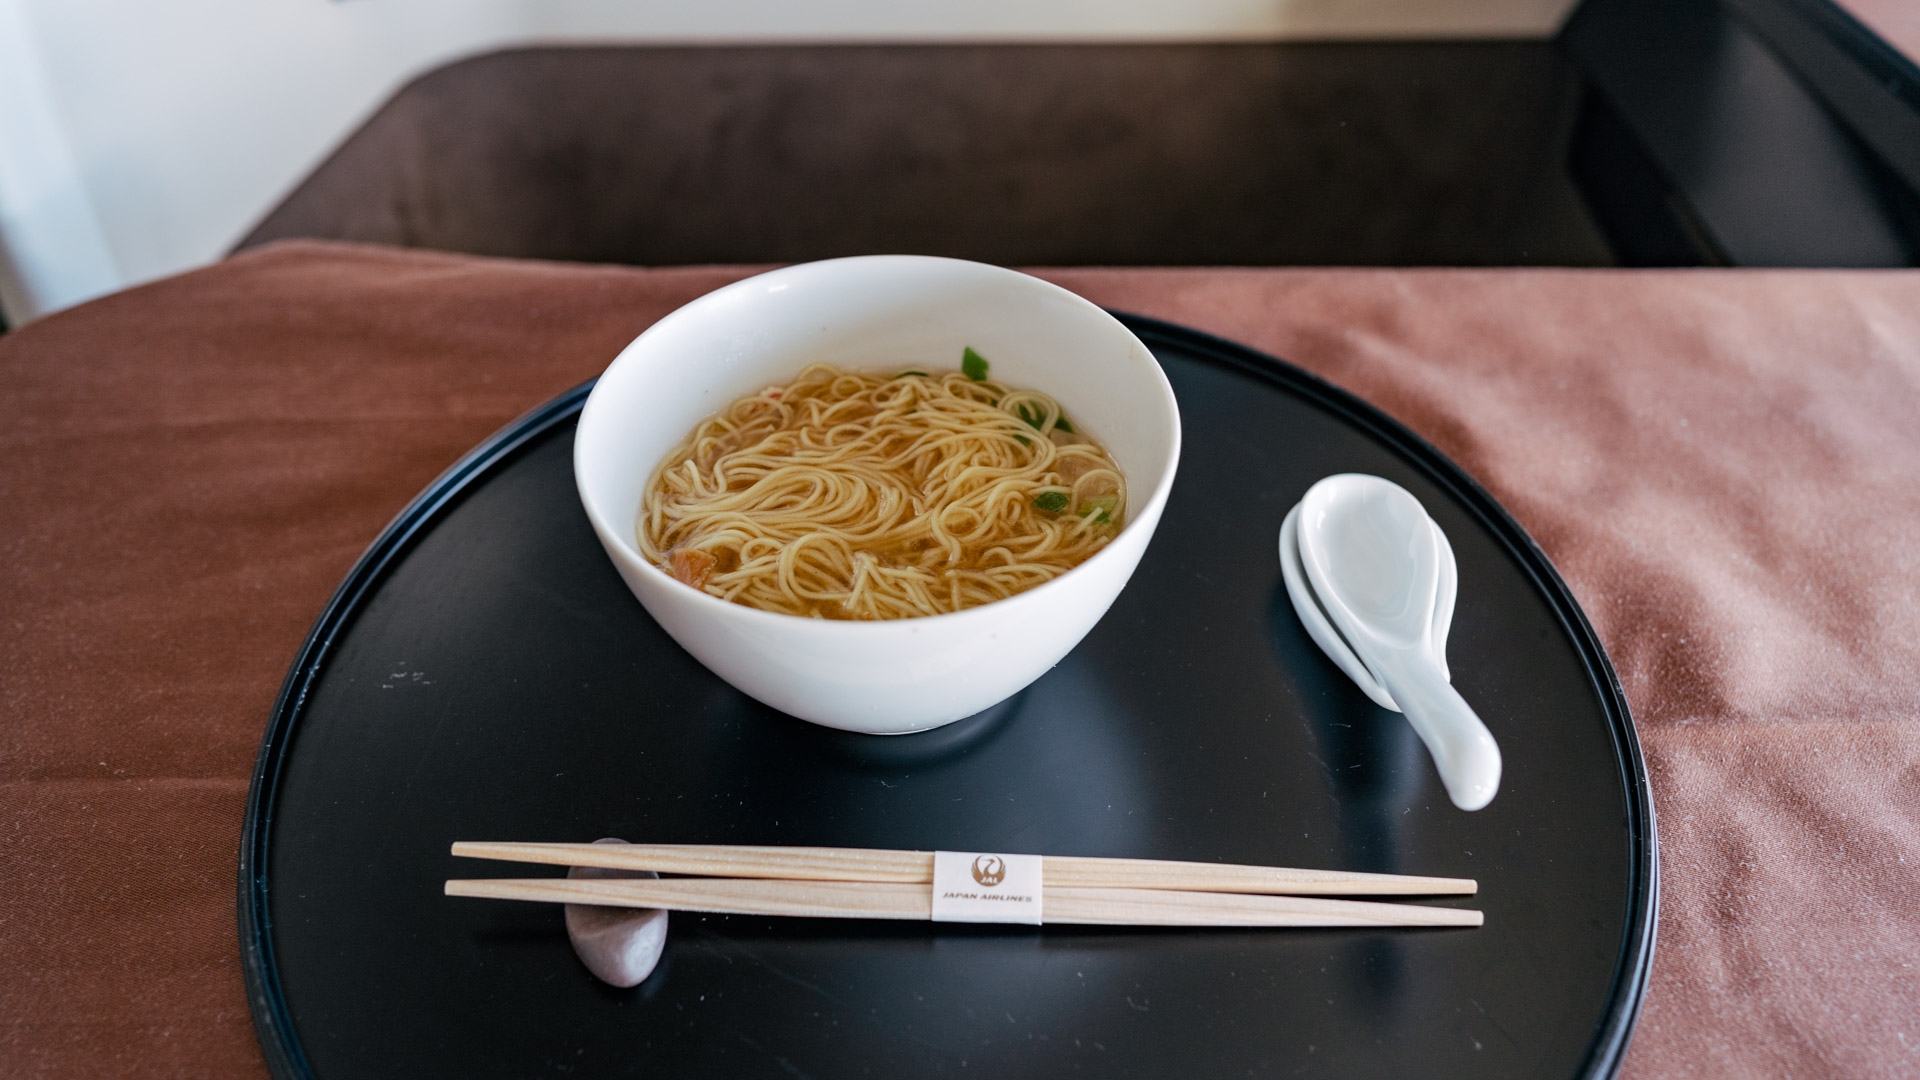 Japan Airlines Boeing 777 First Class JAL soba noodle